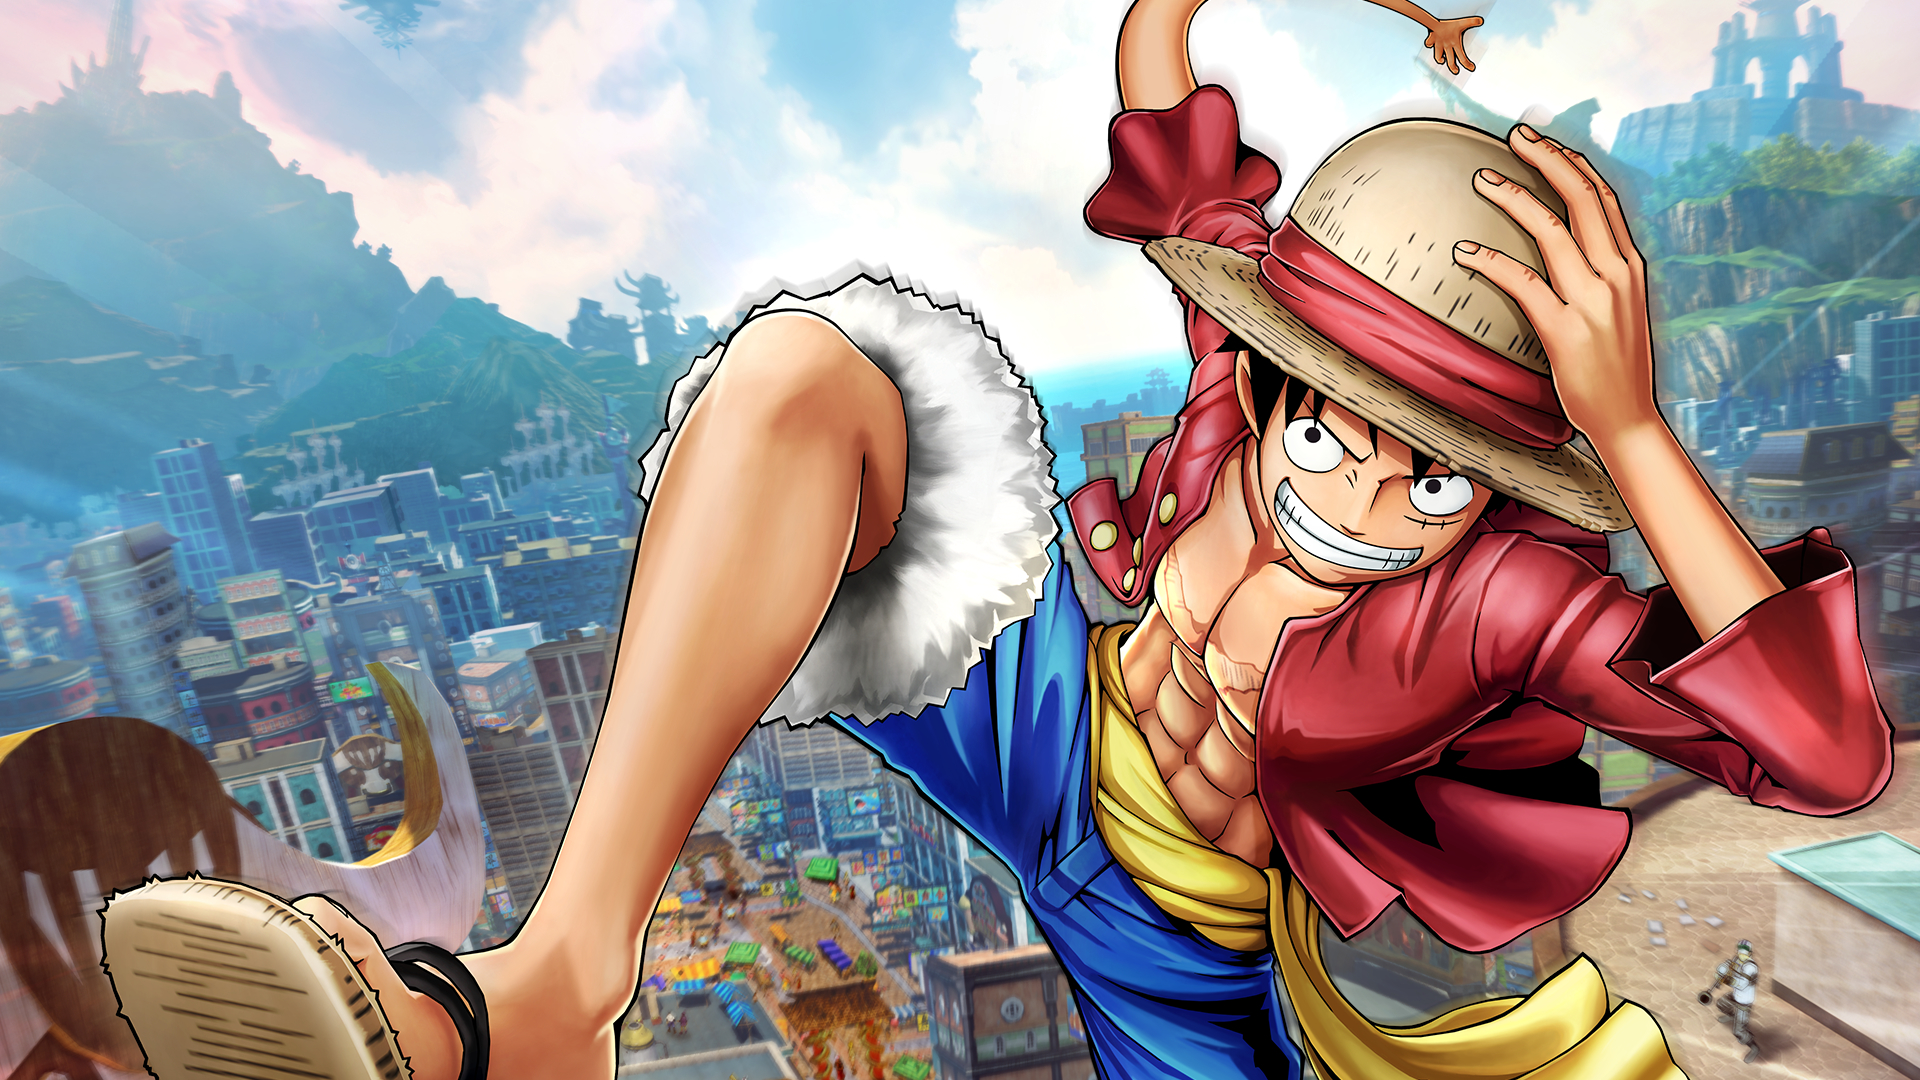 2560x1080 One Piece World Seeker 2560x1080 Resolution Wallpaper Hd Games 4k Wallpapers Images Photos And Background Wallpapers Den